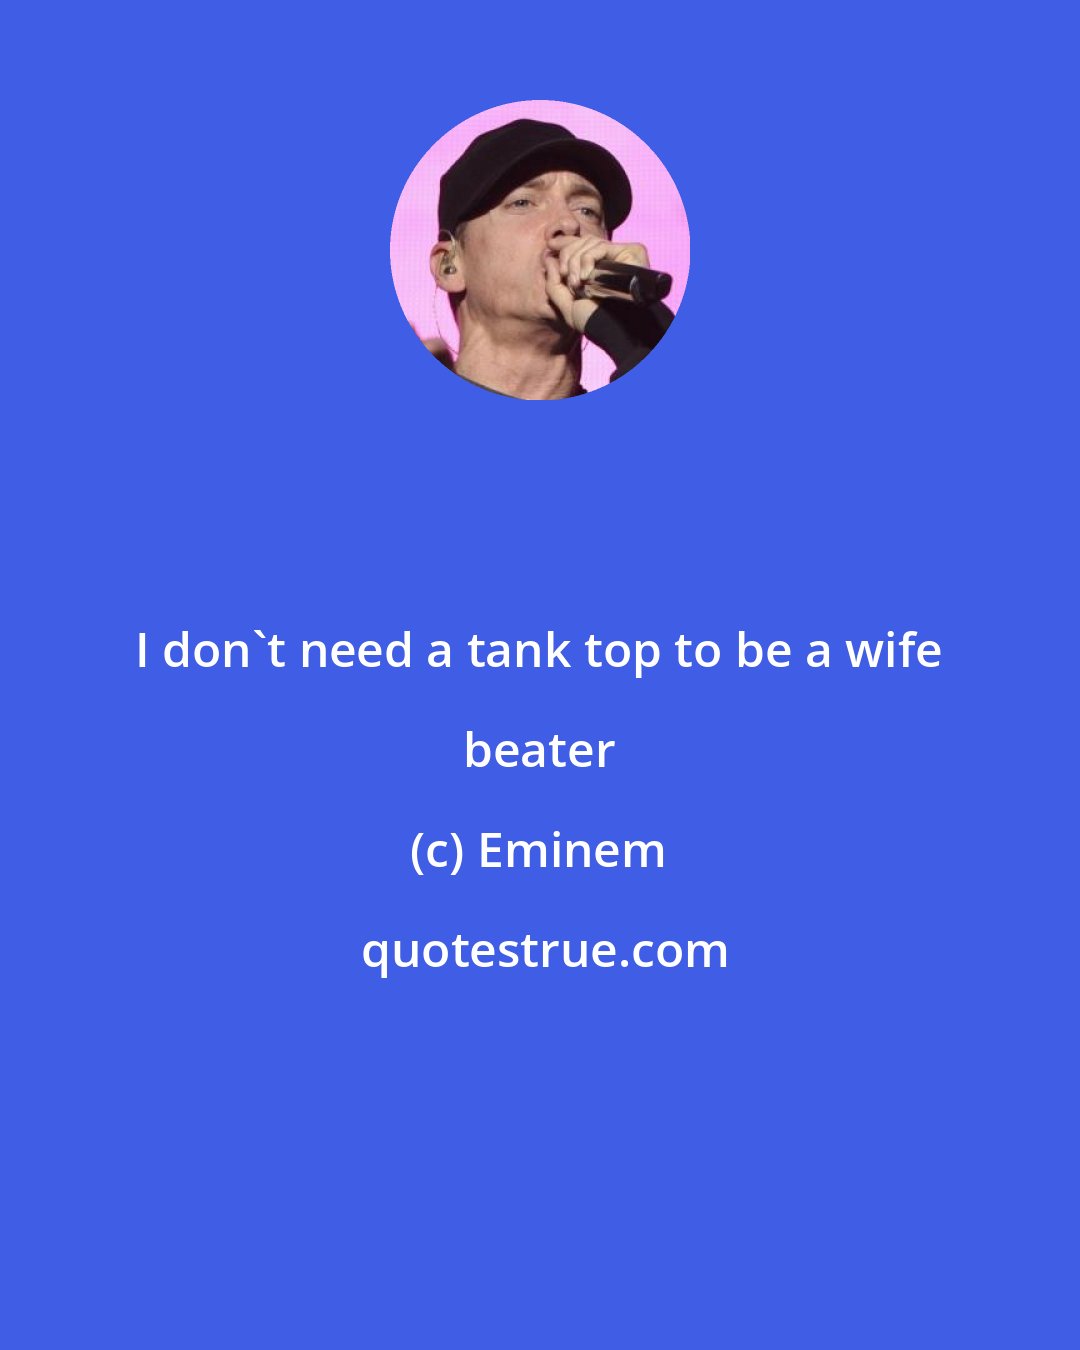 Eminem: I don't need a tank top to be a wife beater